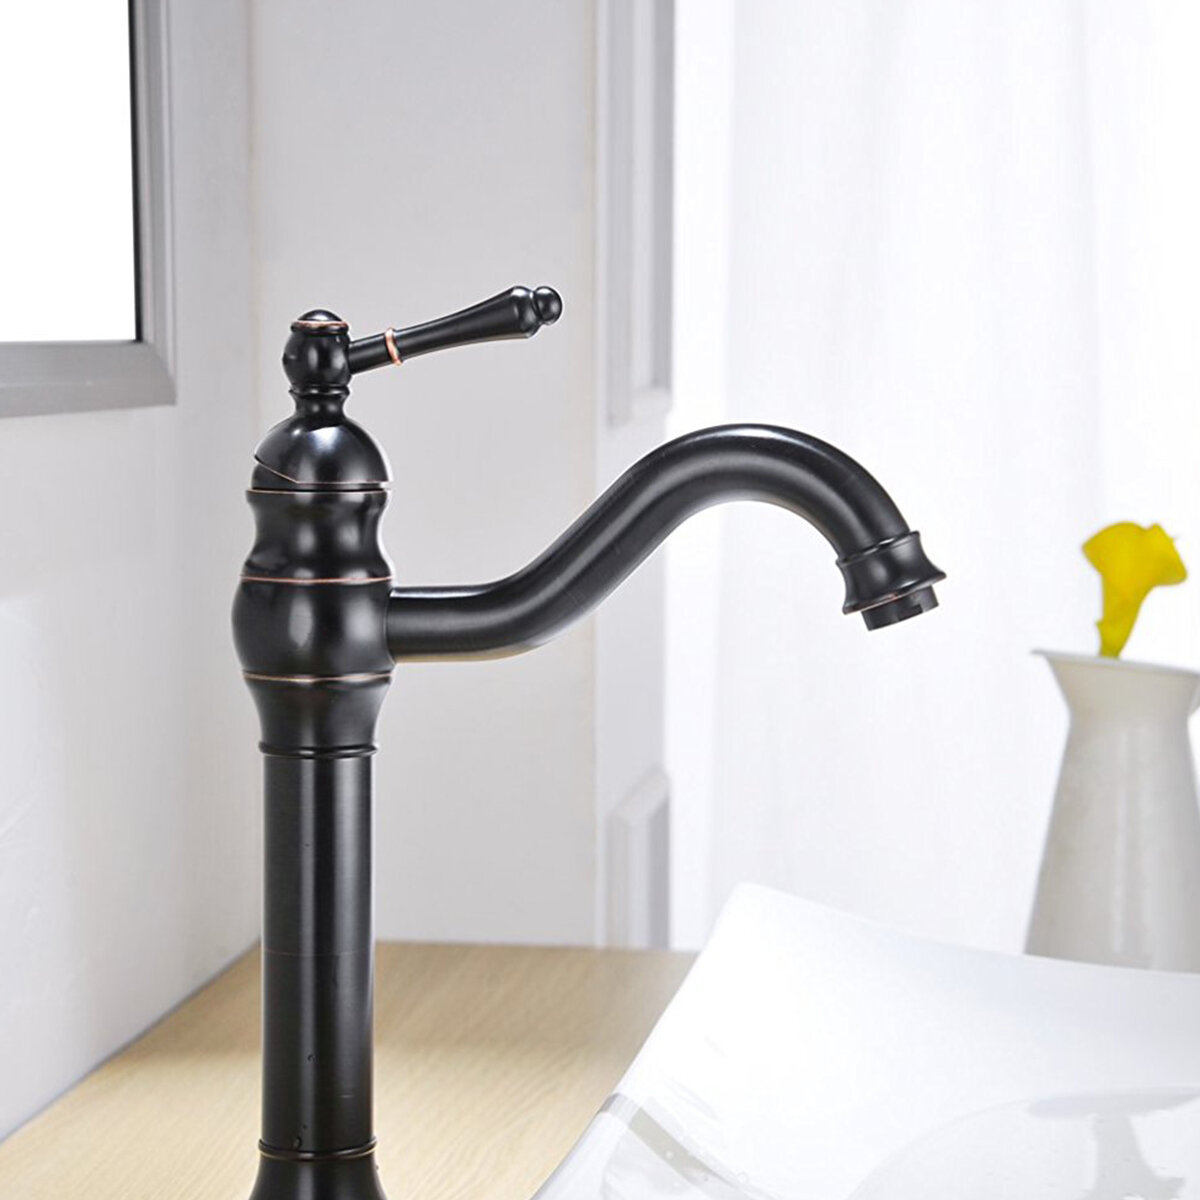 Details about   Bathroom Waterfall Oil Rubbed Bronze Basin Faucet Vanity Sink Tap+Pop Up Drain-B